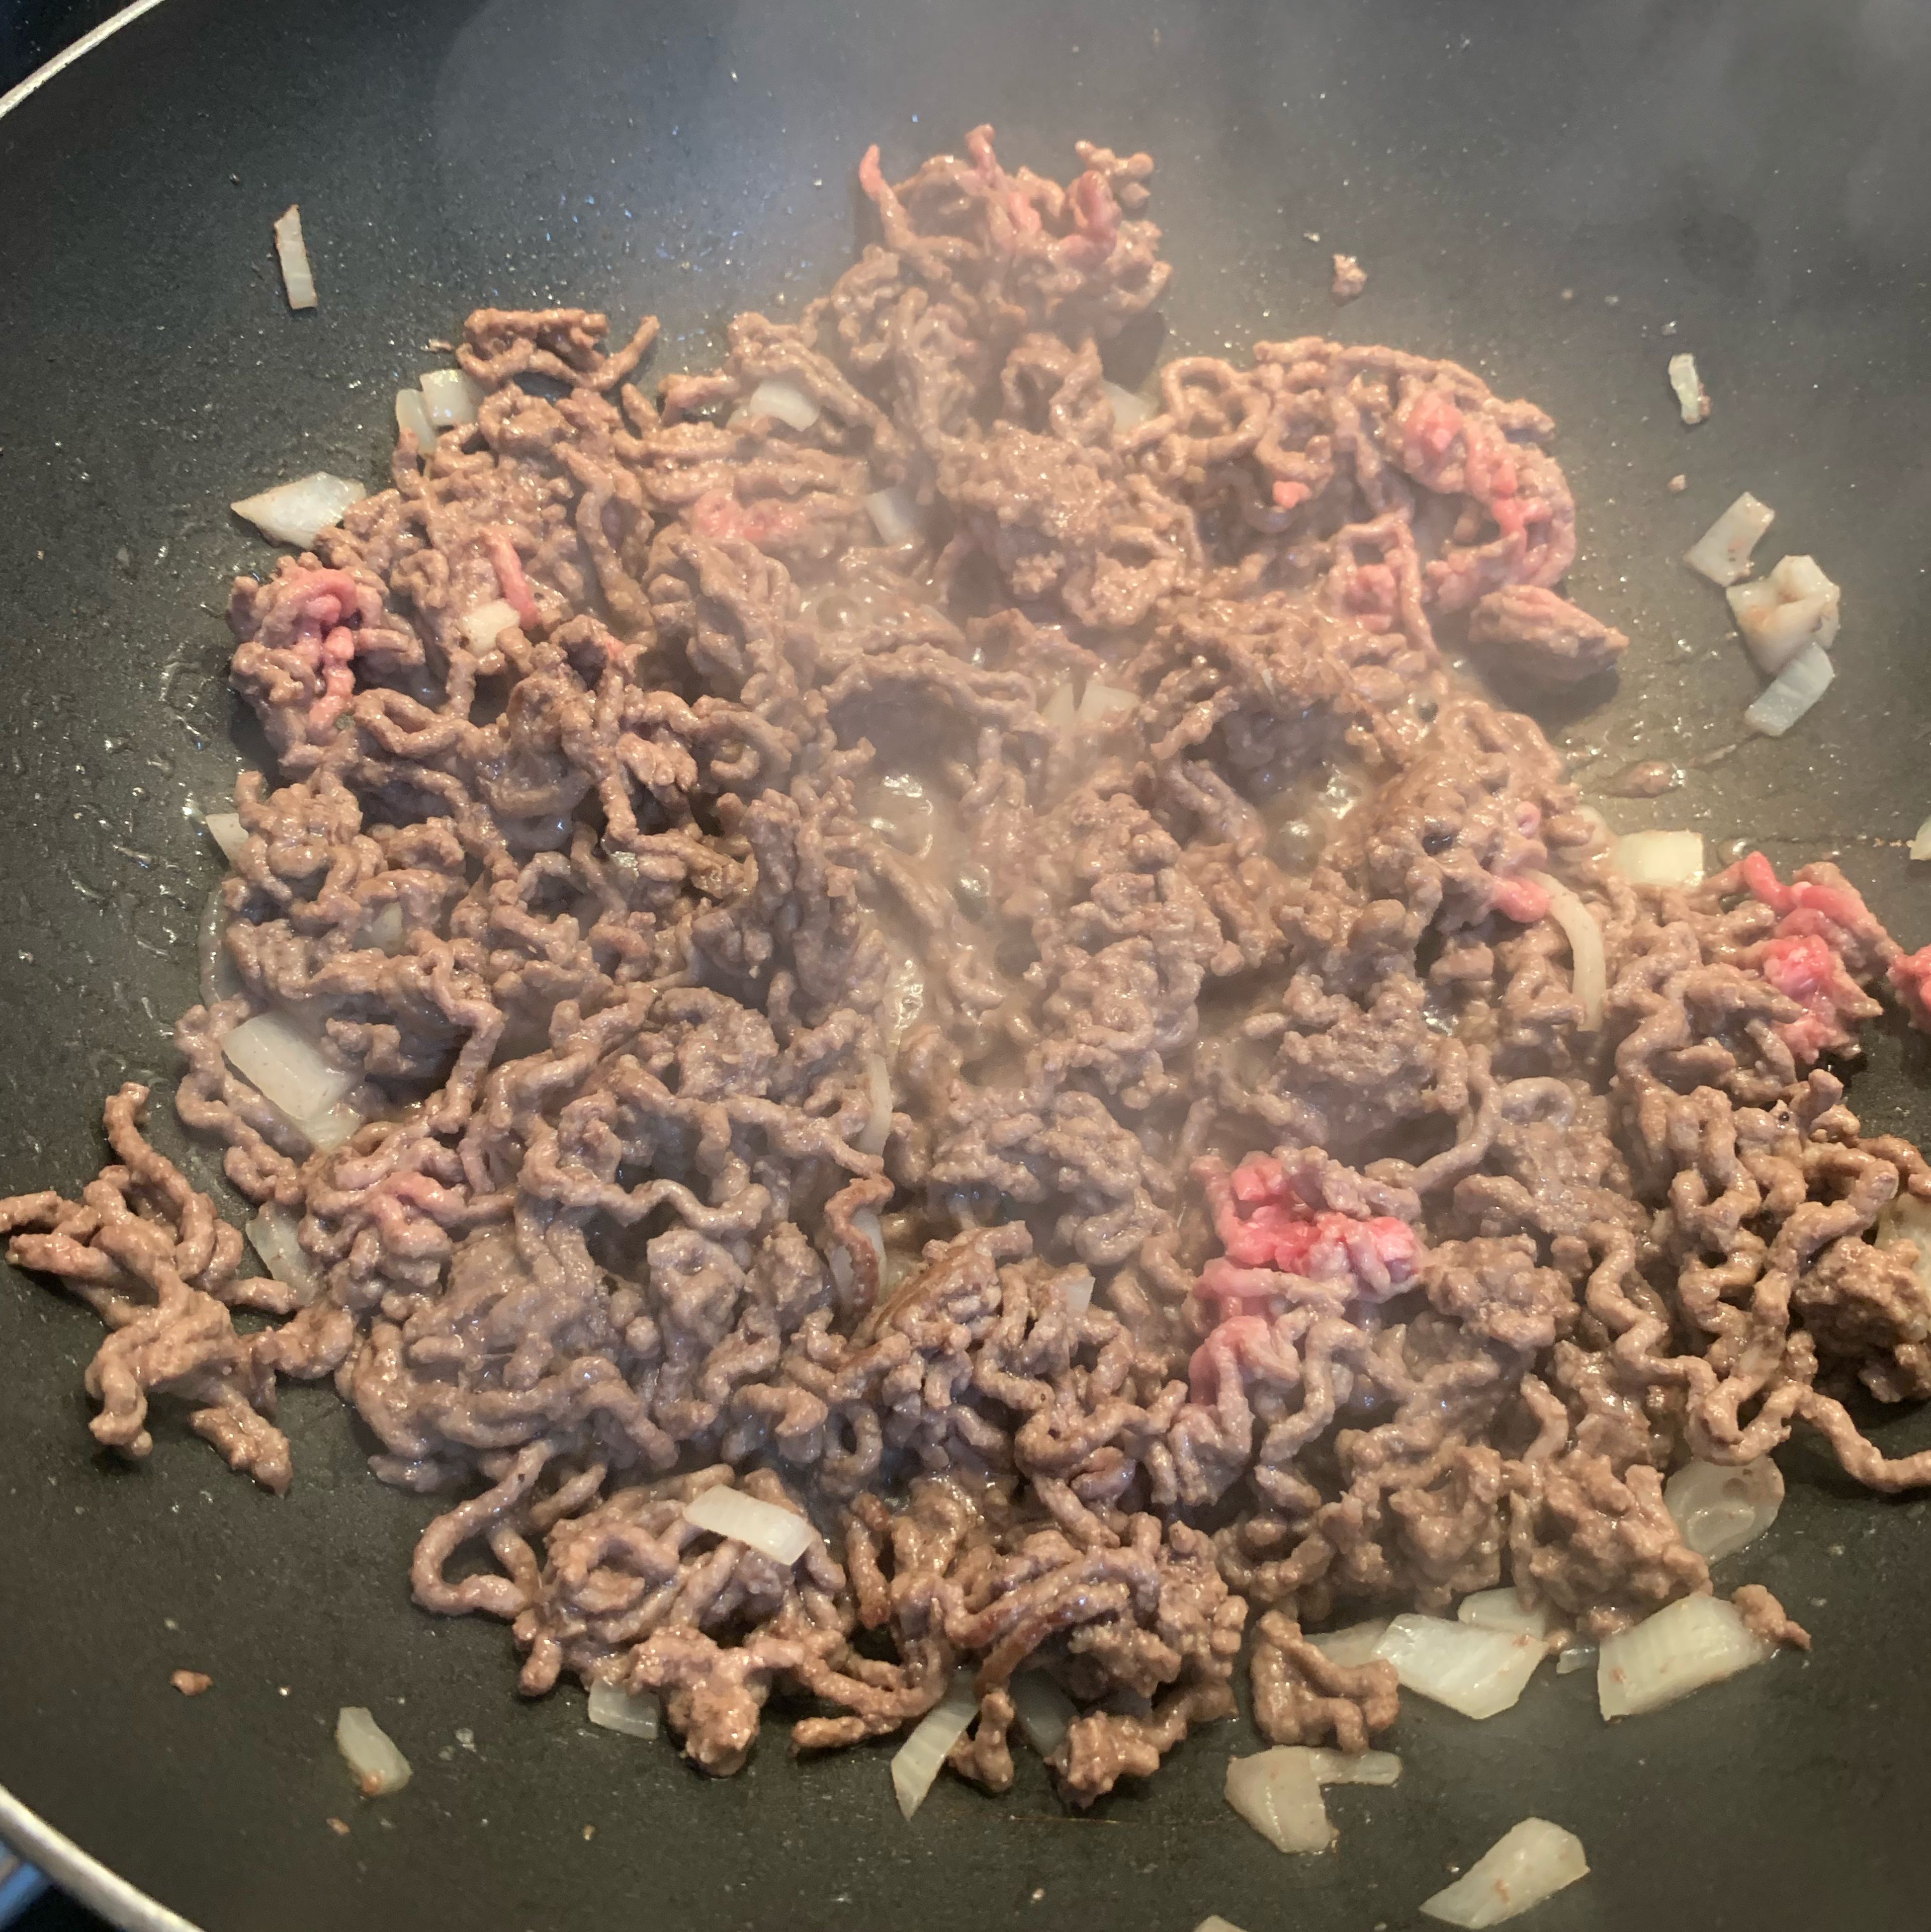 Start cooking the steak mince in a little bit of oil, adding half of an onion cut in pieces which will add an amazing flavour to the meat. Also season with a pinch of pepper, salt and parsley.